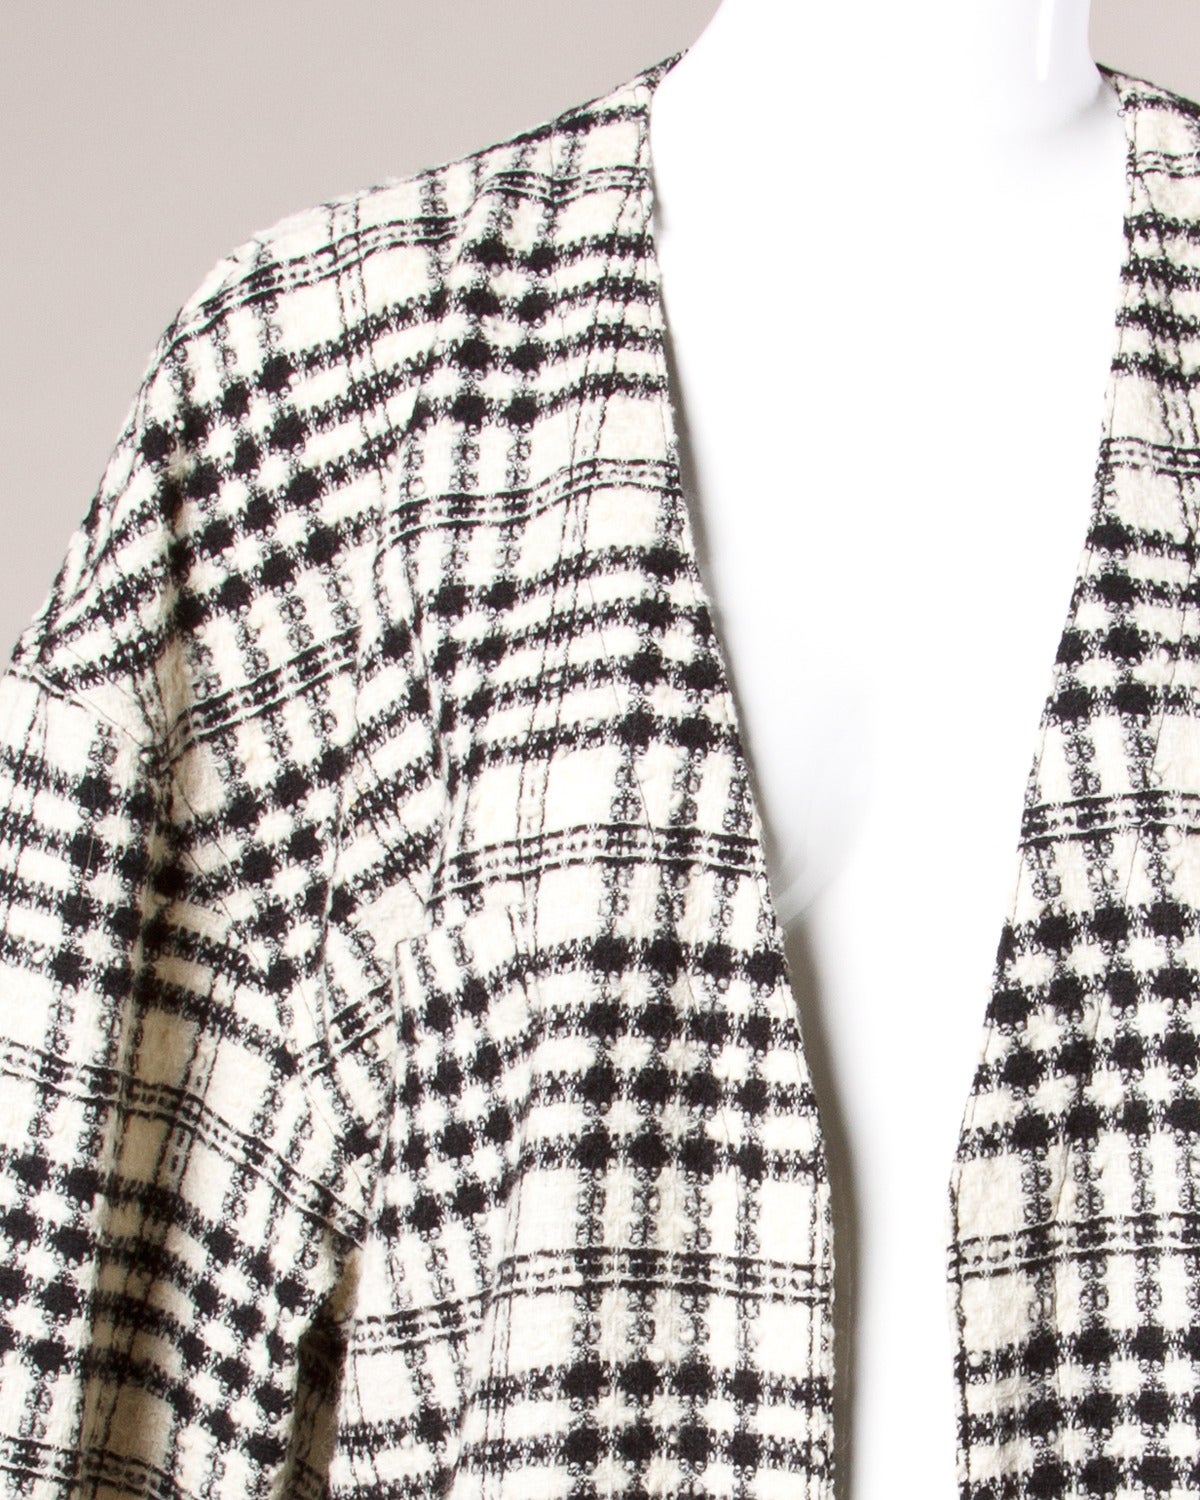 Vintage black and beige plaid cardigan duster by Sonia Rykiel. Front pockets and long sleeves.

Details:

Unlined
Front Pockets
No Closure/ Hangs Open
Colors: Black/ Beige
Estimated Size: Small Medium
Fabric: 94% Wool / 6% Polyamide
Label: